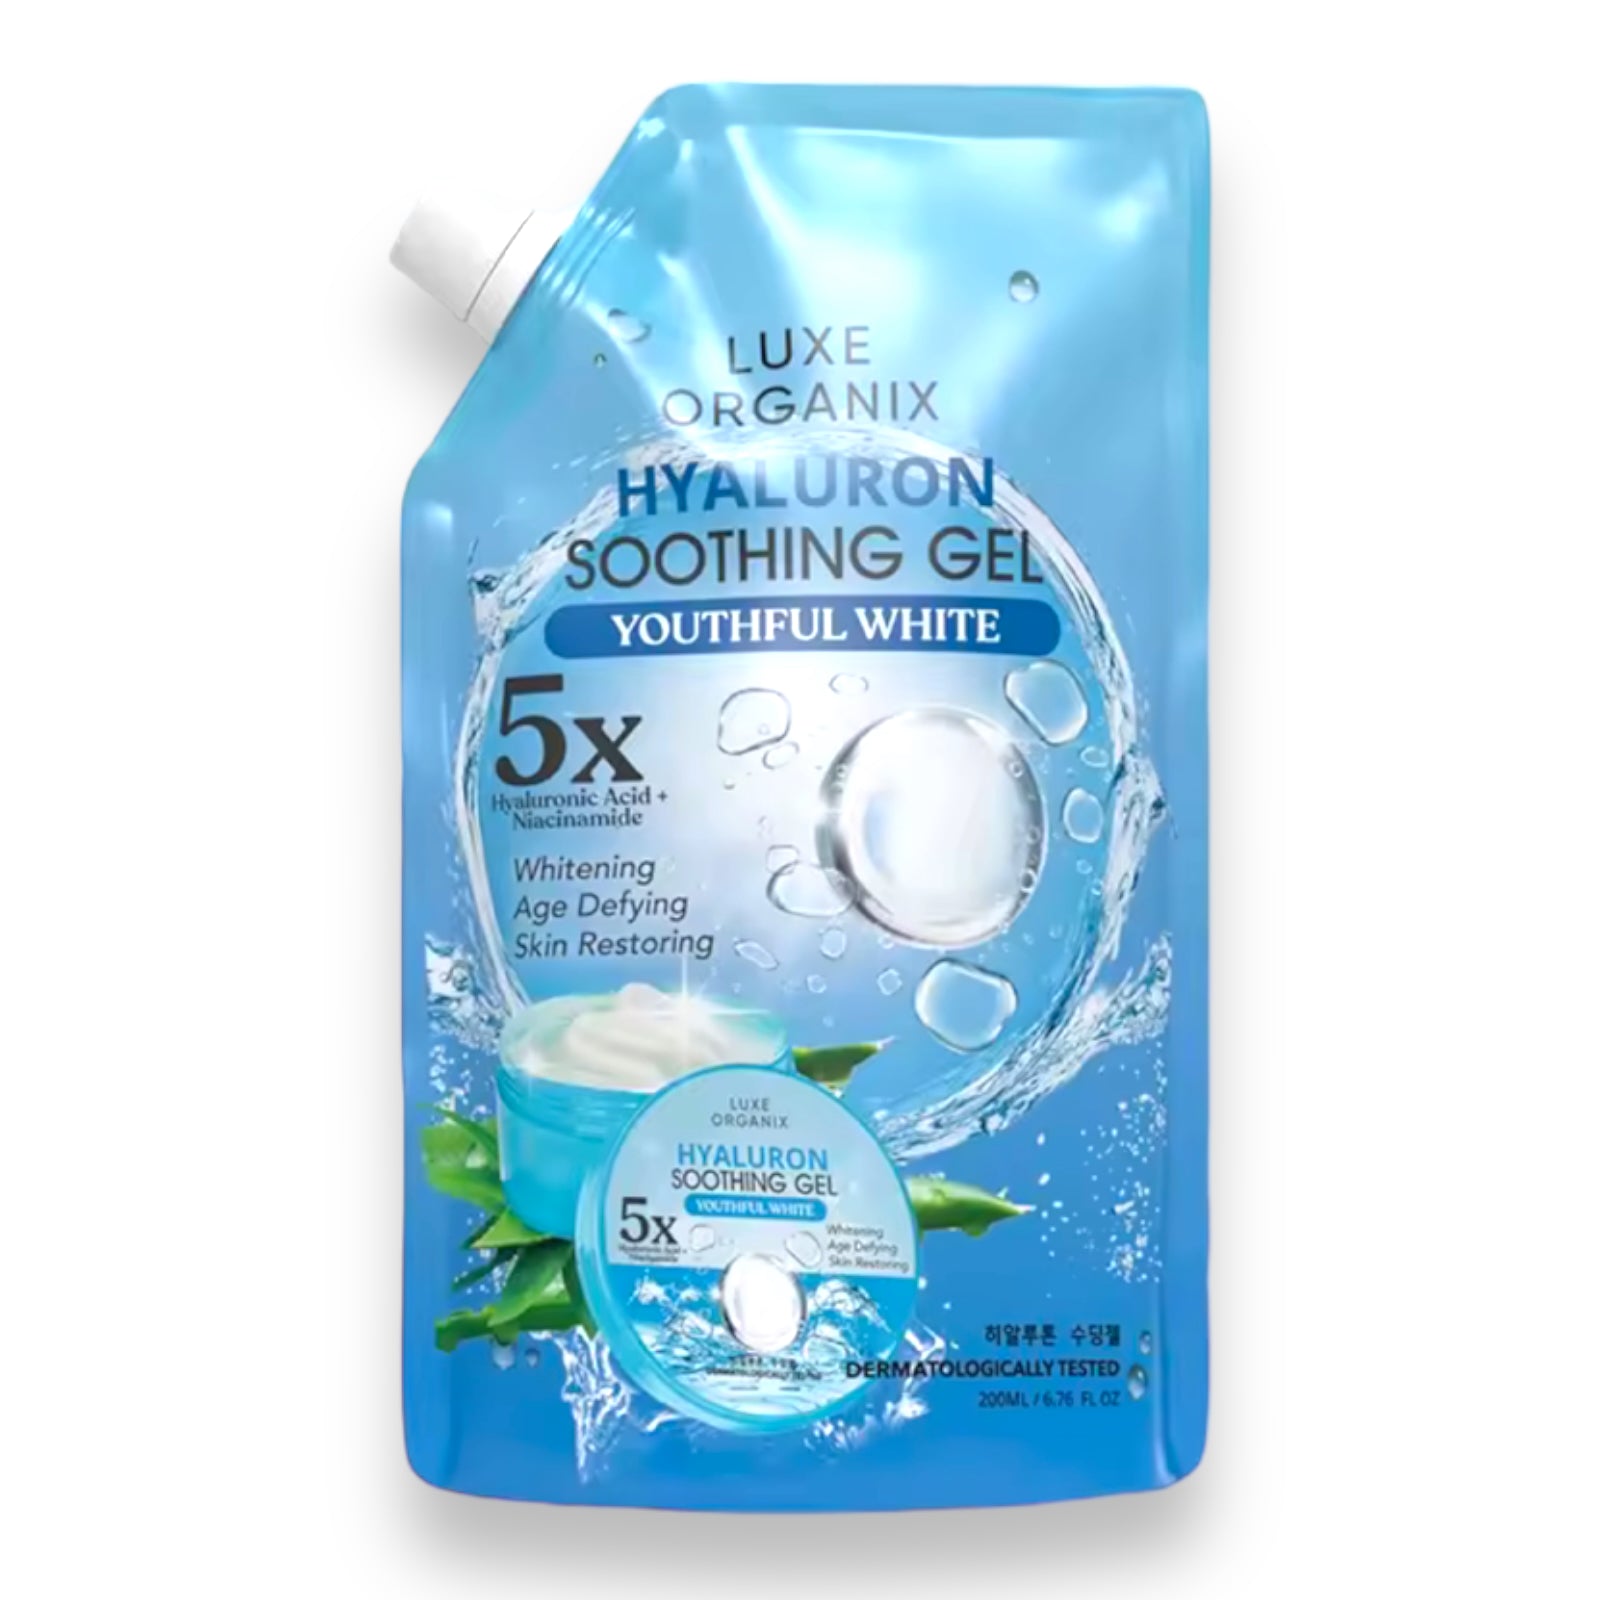 LUXE ORGANIX - Hyaluron Soothing Gel - Youthful White 200 ml